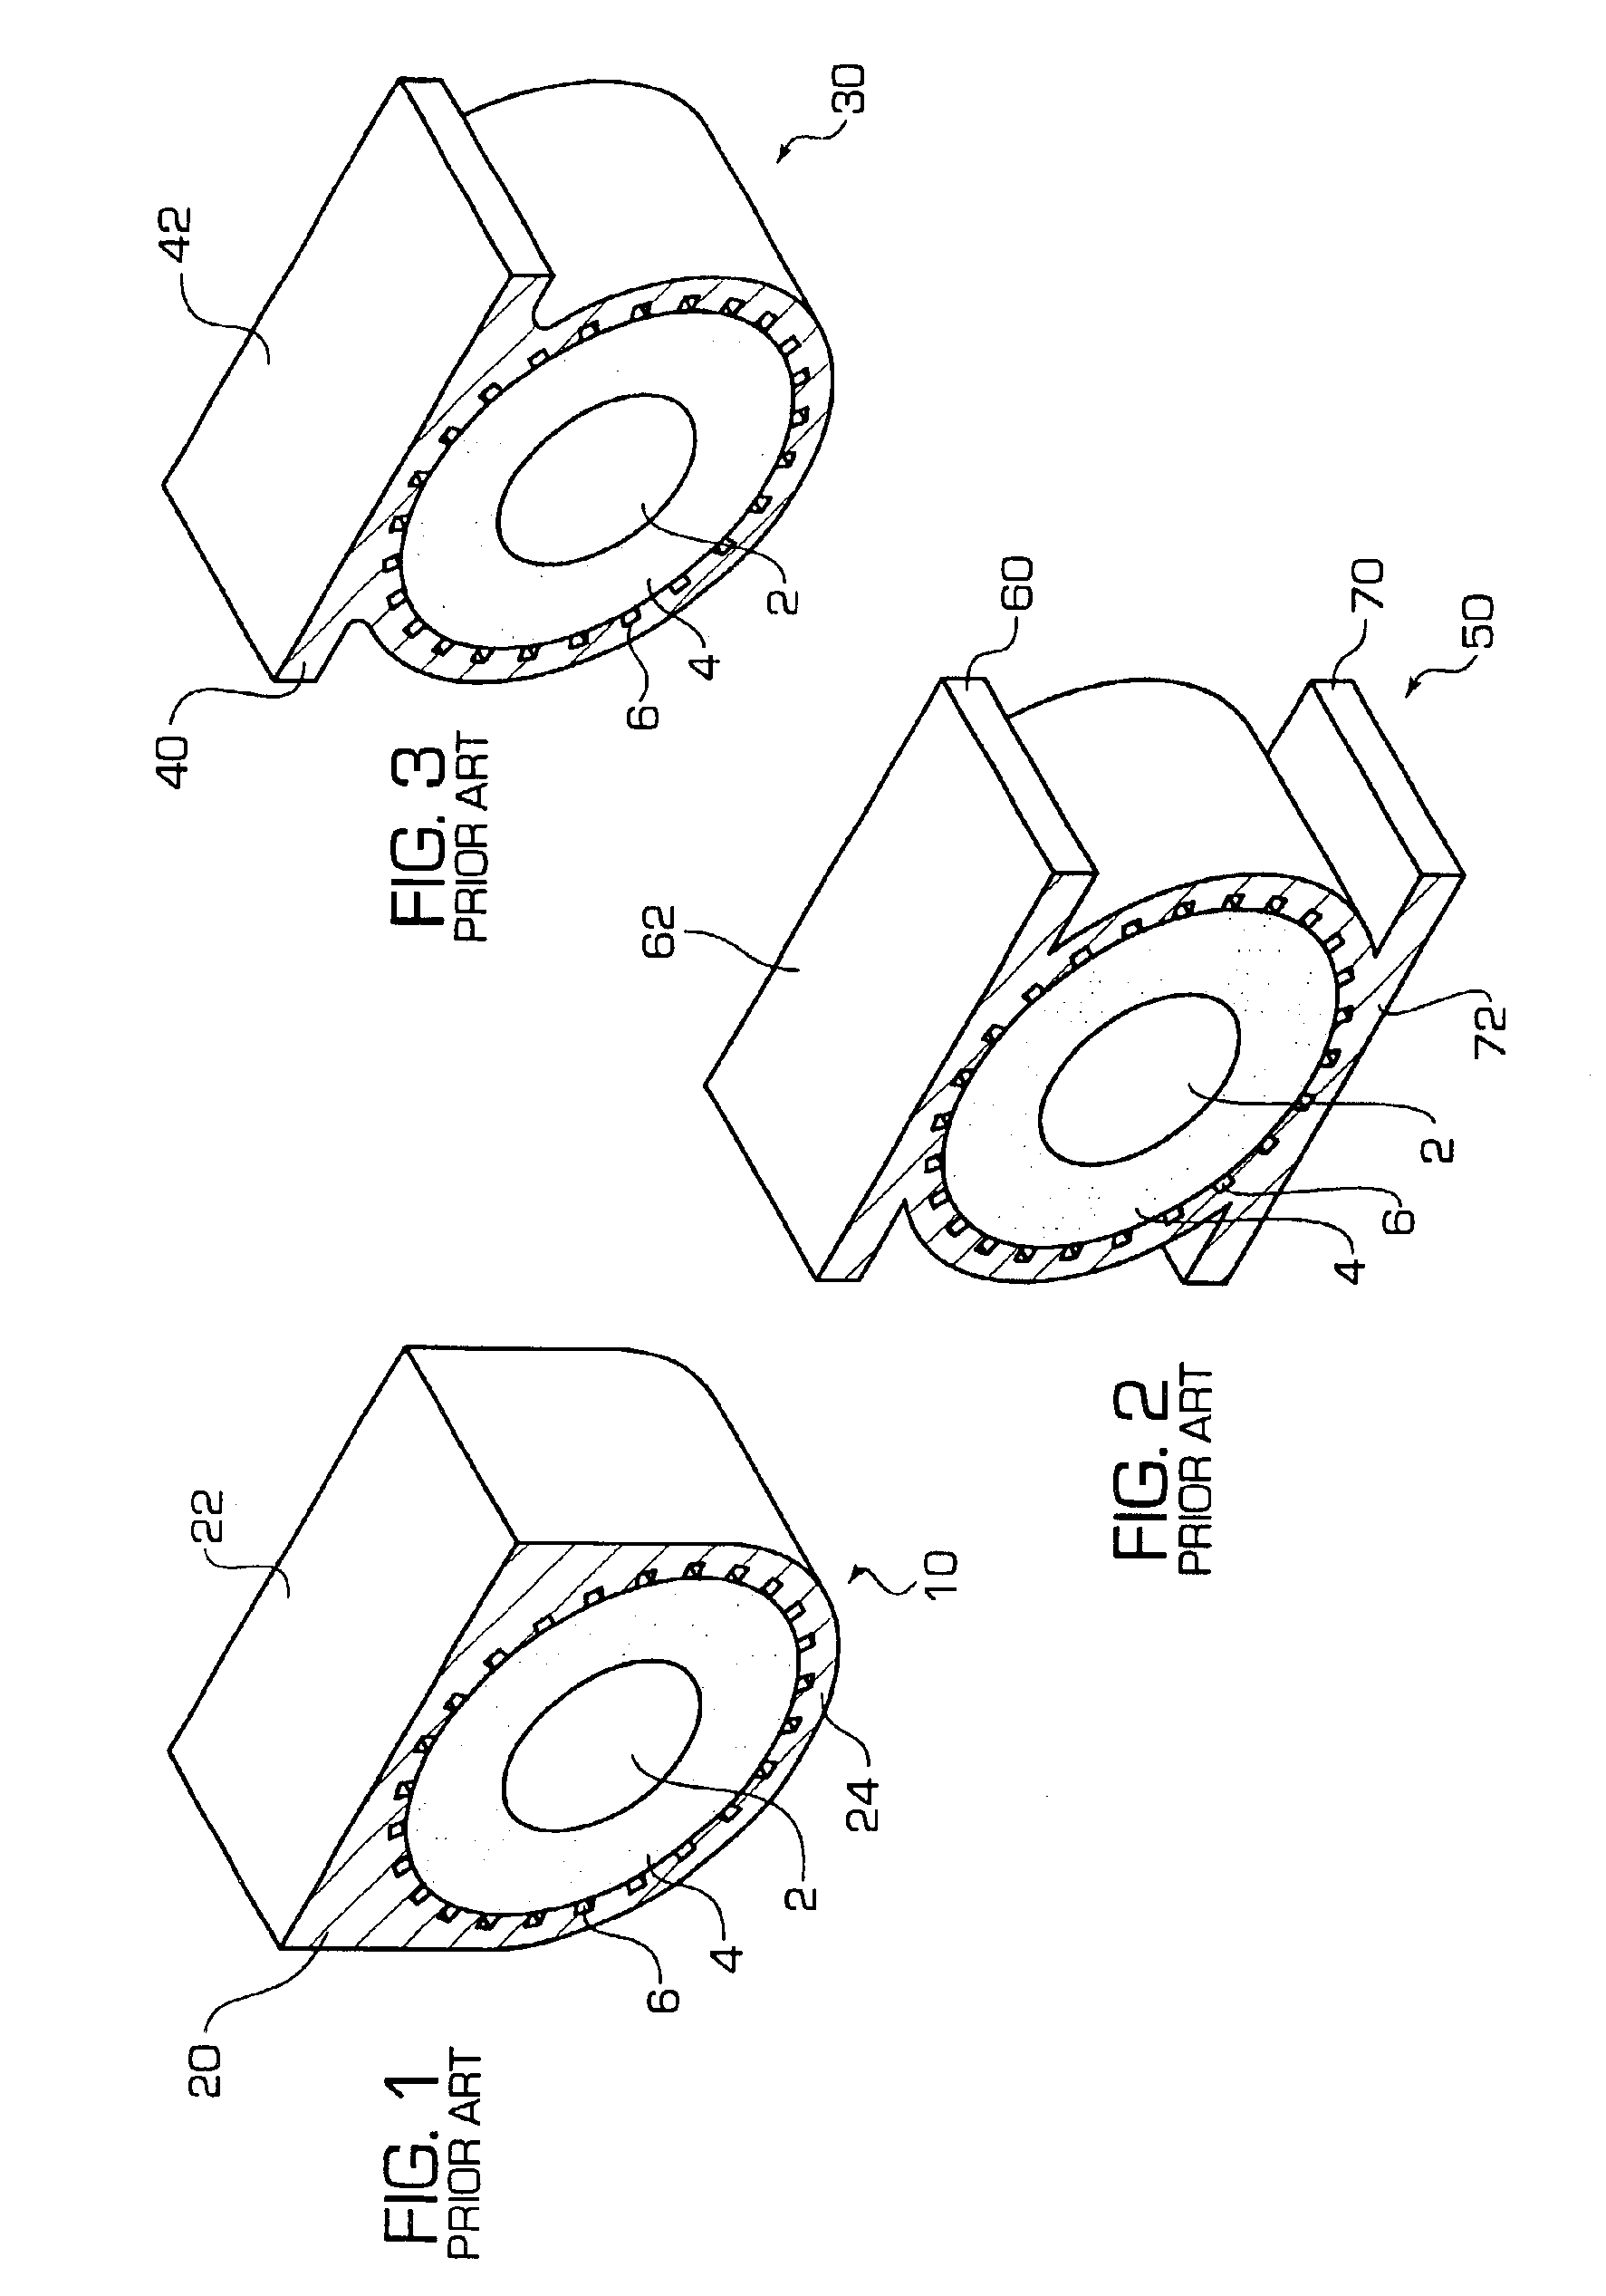 Wick having liquid superheat tolerance and being resistant to back-conduction, evaporator employing a liquid superheat tolerant wick, and loop heat pipe incorporating same